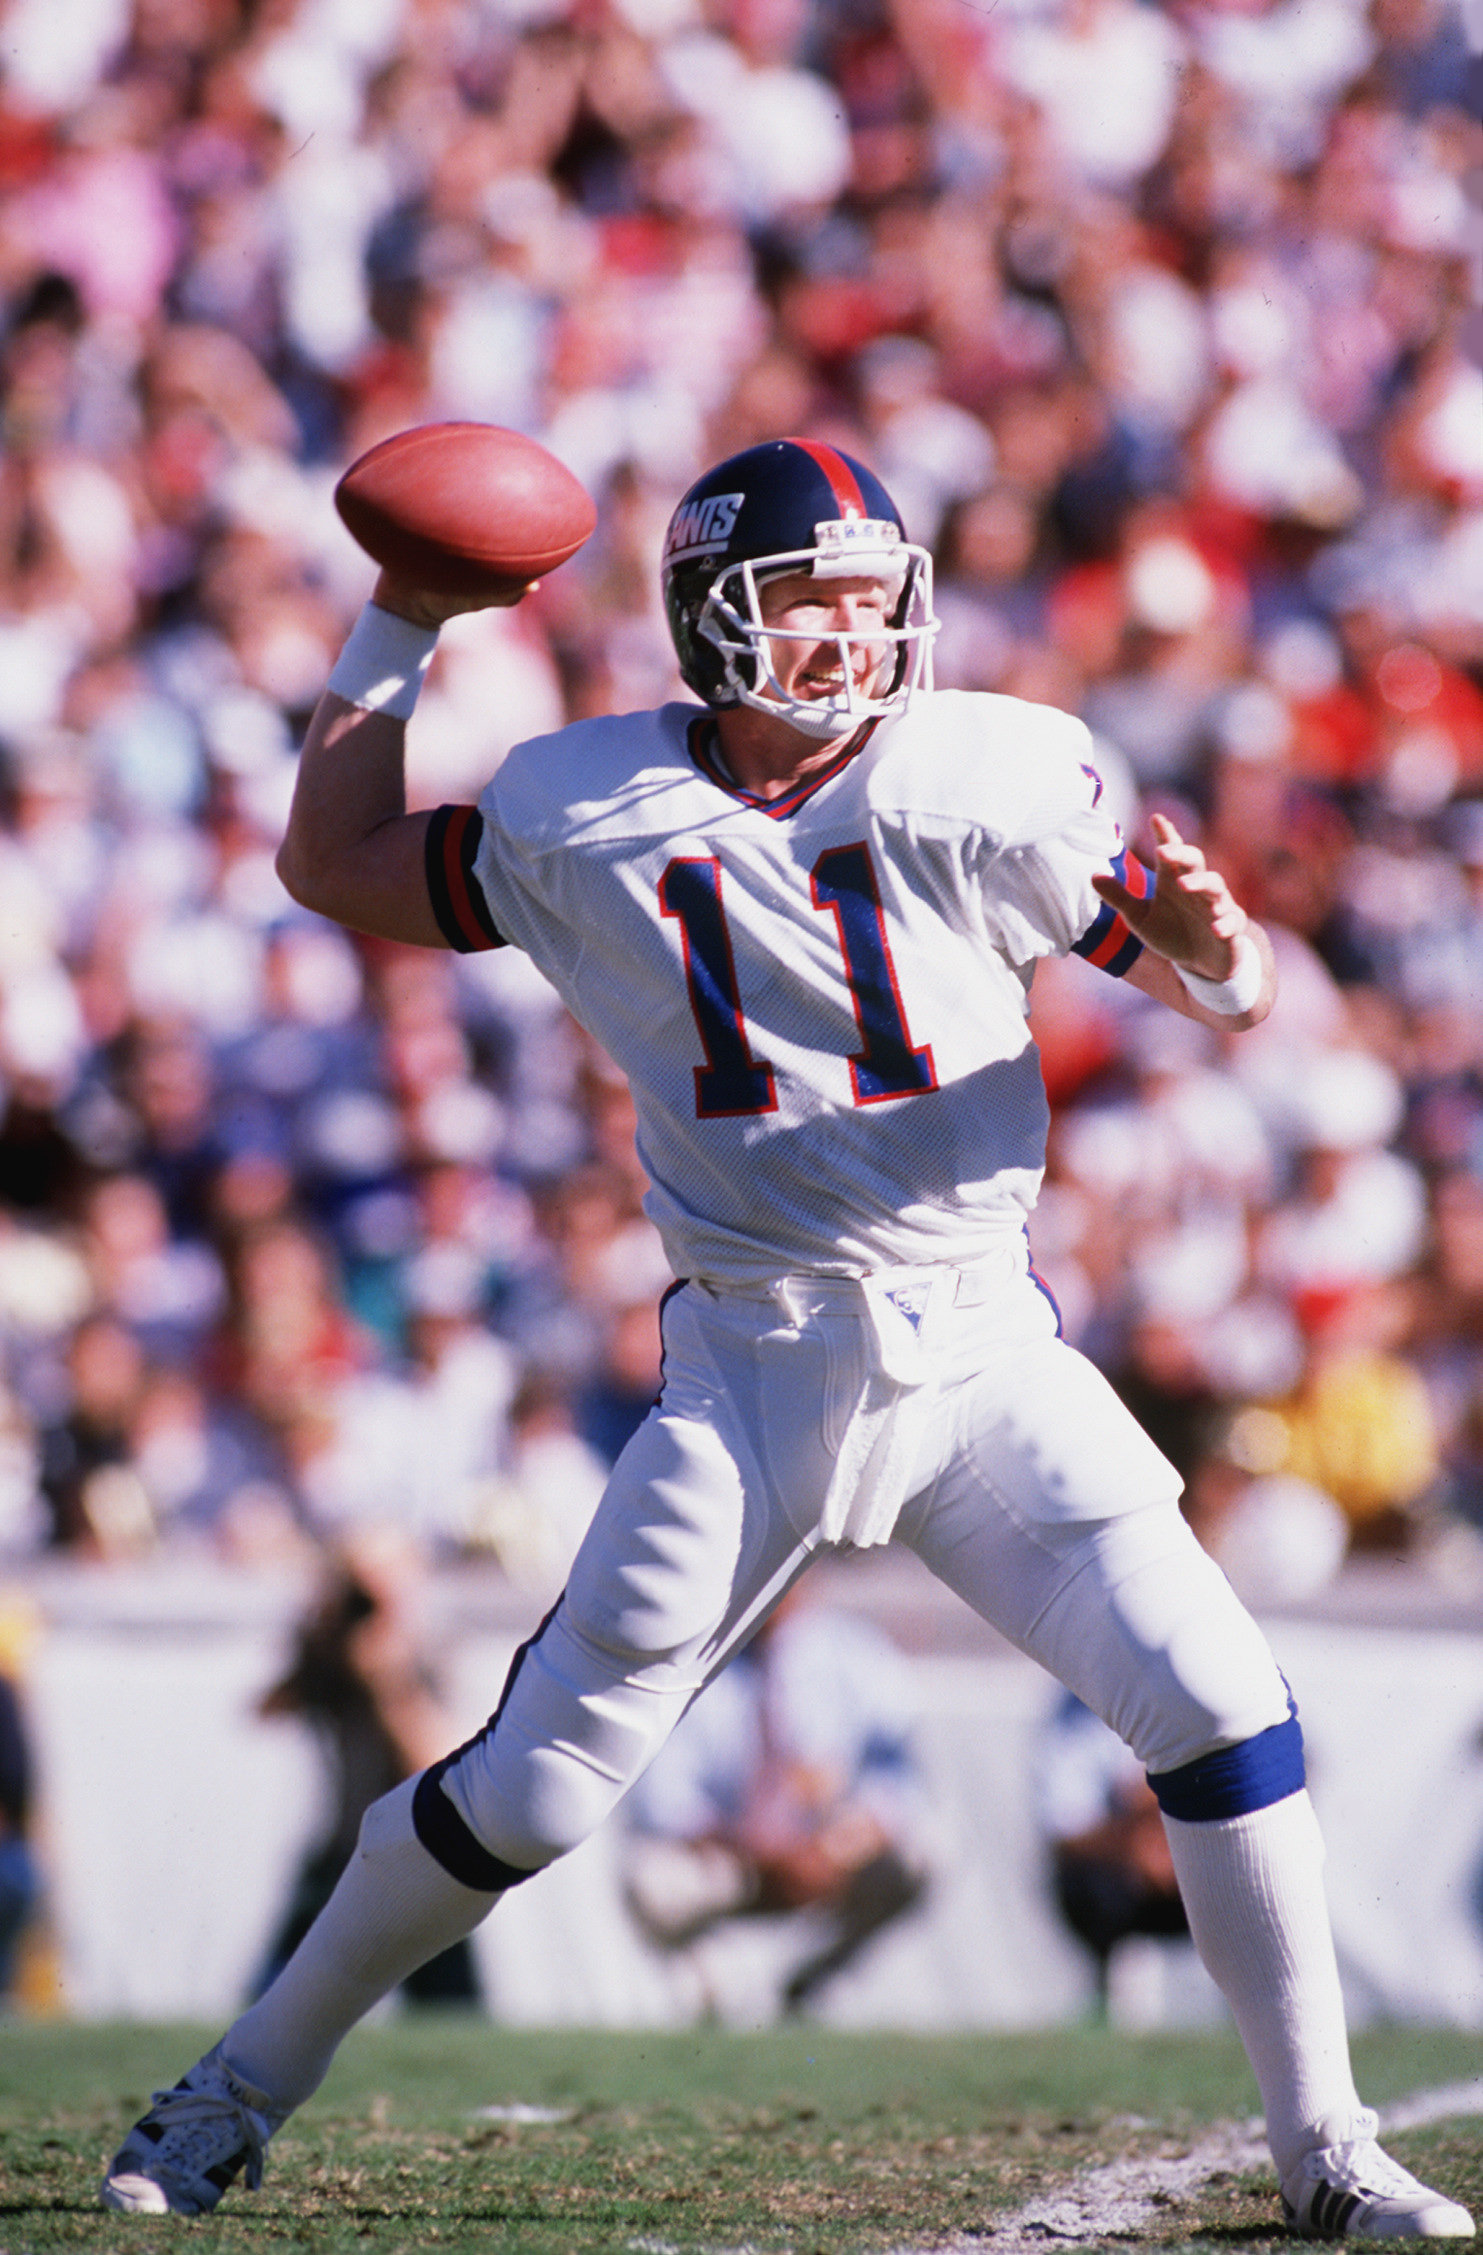 UNDATED:  QUARTERBACK PHIL SIMMS OF THE NEW YORK GIANTS SETS AND THROWS A PASS DURING A GIANTS NFL GAME.  Mandatory Credit: Mike Powell/ALLSPORT